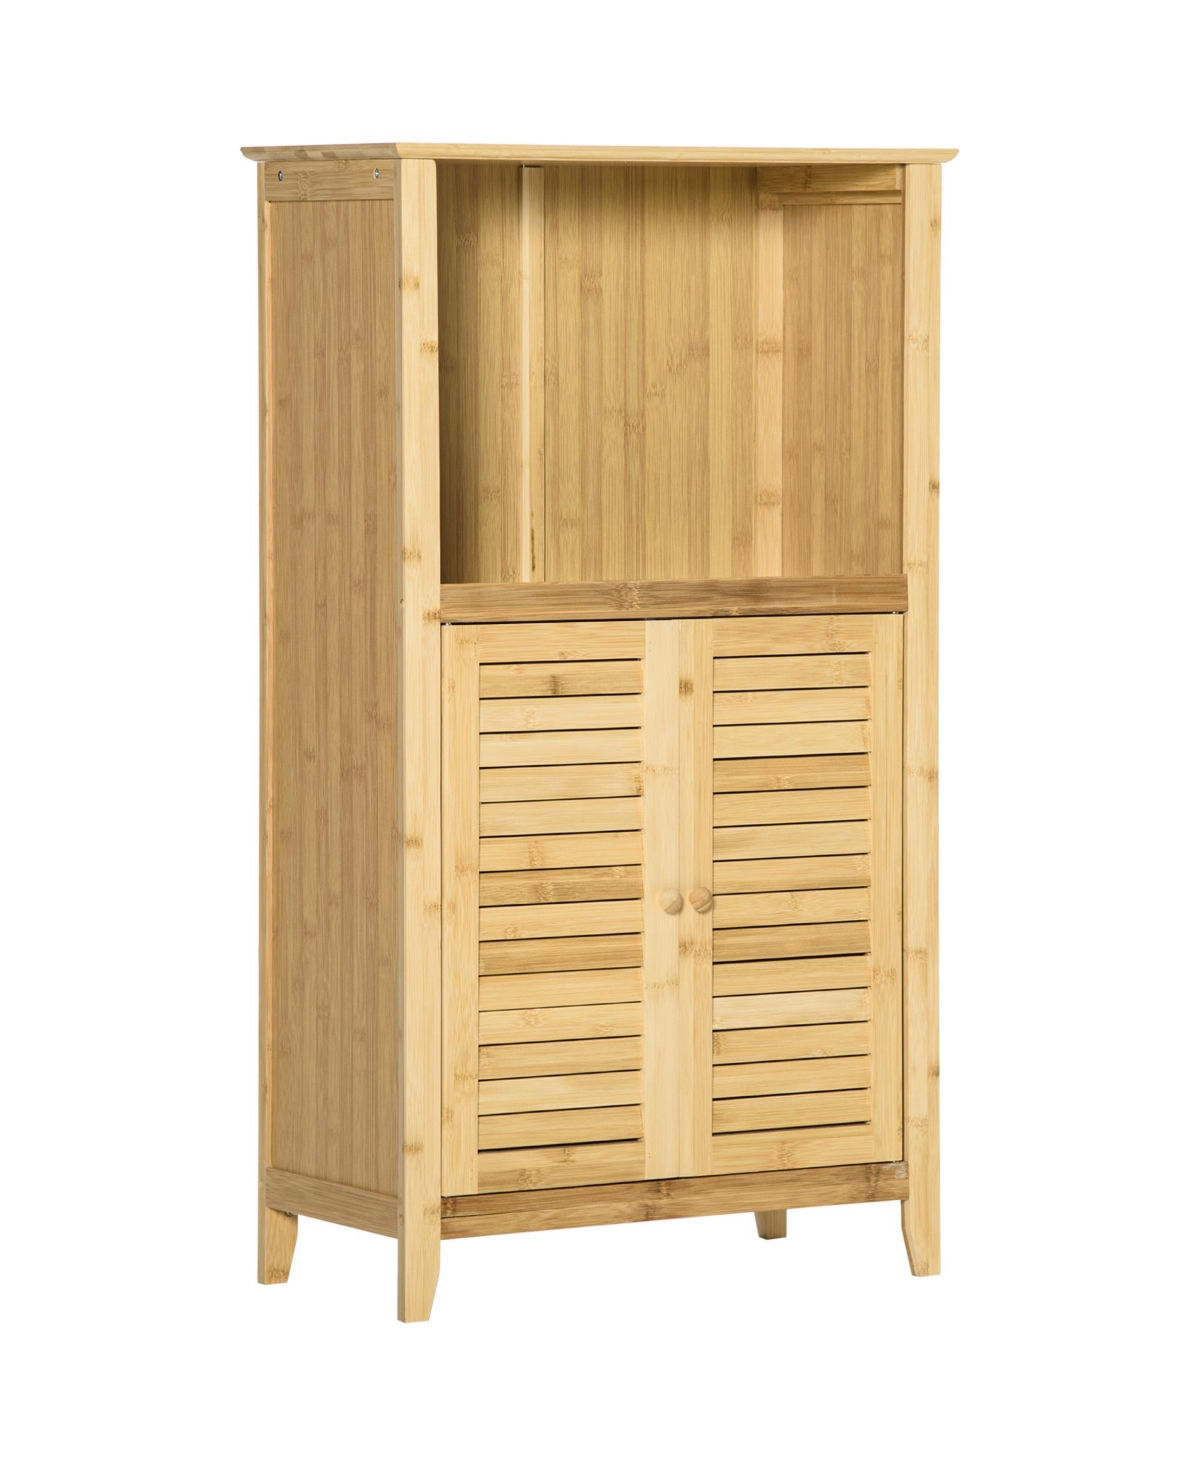 Freestand Wooden Landing Cabinet Pantry Space w/Multifunctional Use, Natural - Natural